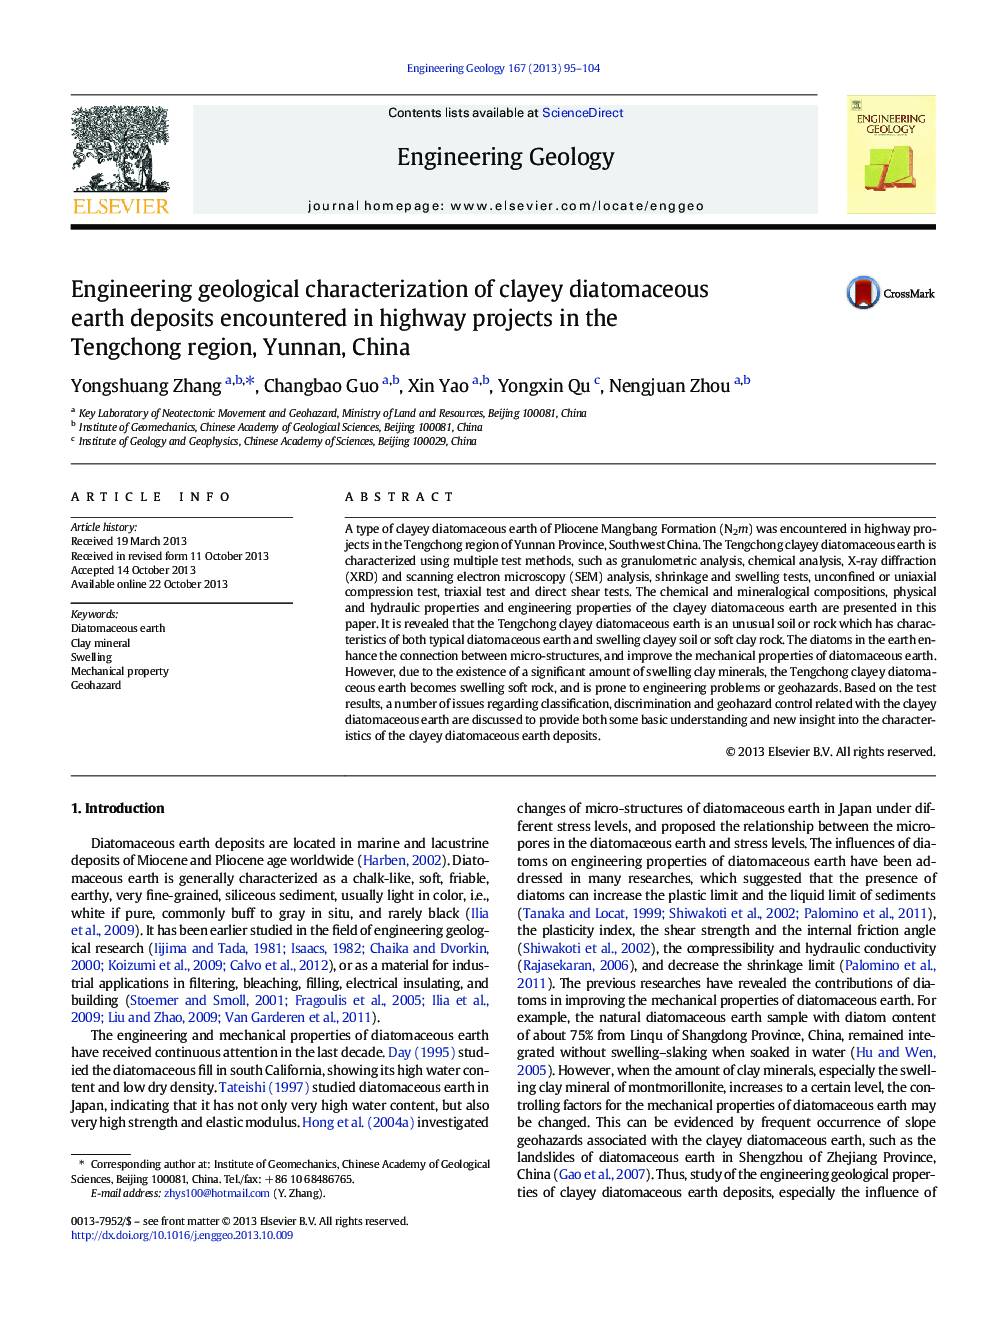 Engineering geological characterization of clayey diatomaceous earth deposits encountered in highway projects in the Tengchong region, Yunnan, China